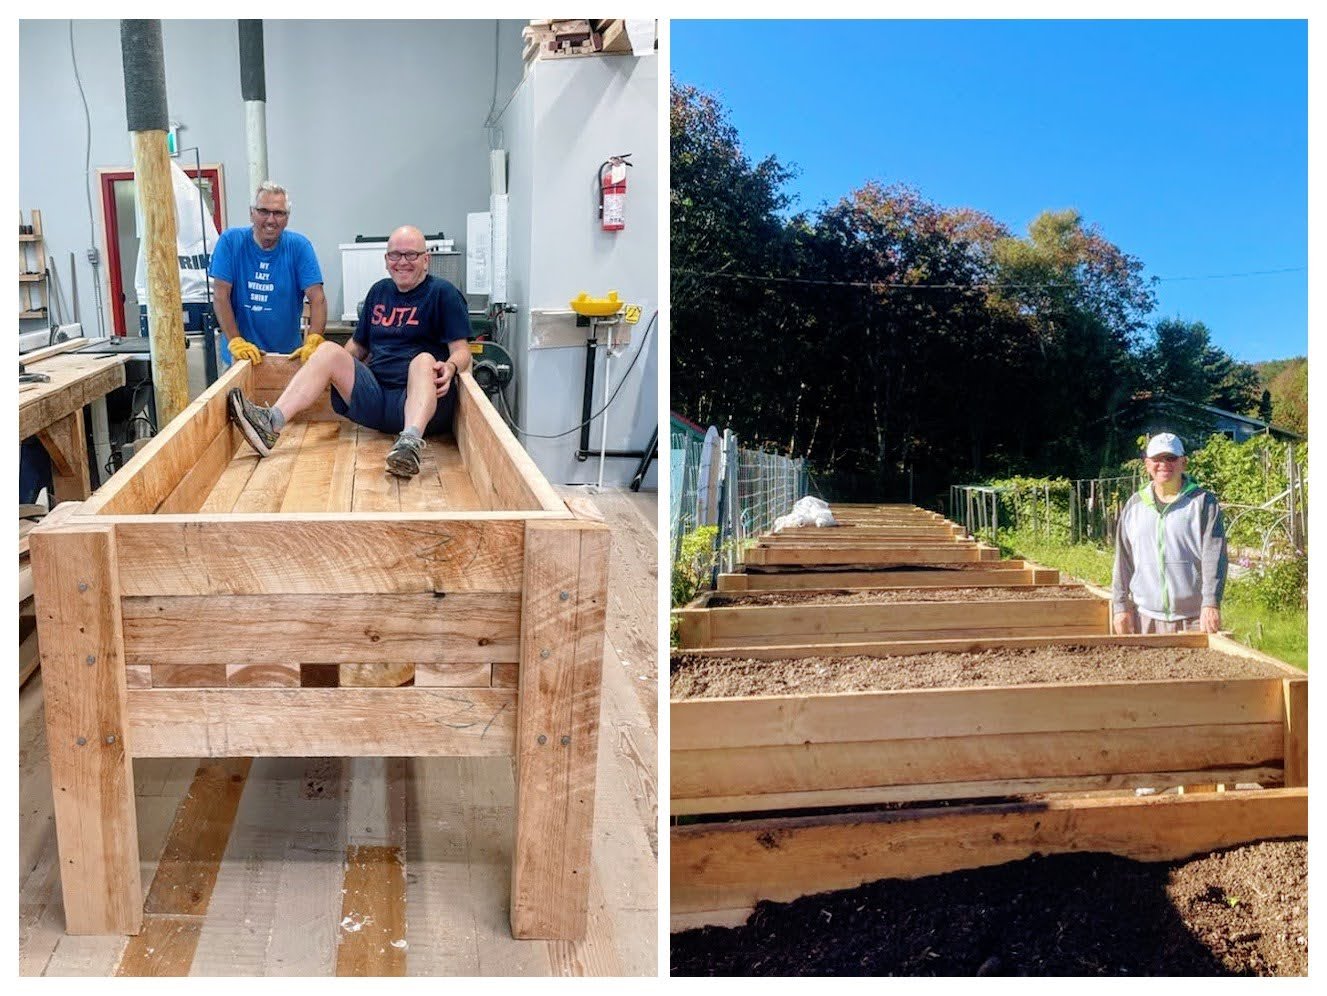 Rick and Peter sitting in one of their Raised Beds for the Rockwood Park Community Garden after just completely construction in our DIY Workshop.